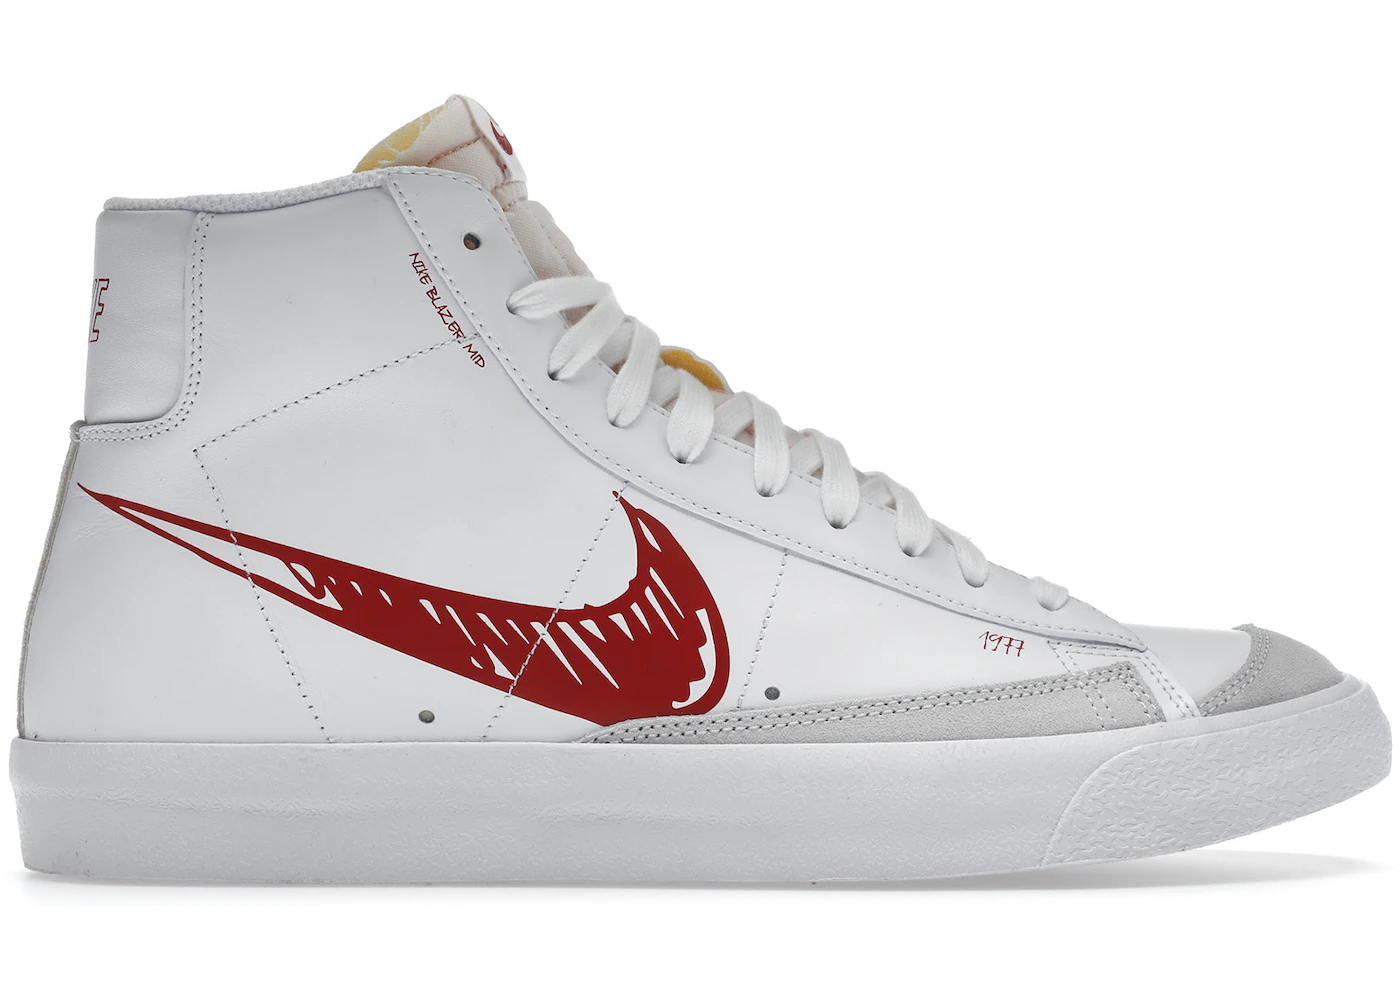 Nike Mid 77 Sketch White Red Hombre - CW7580-100 - ES